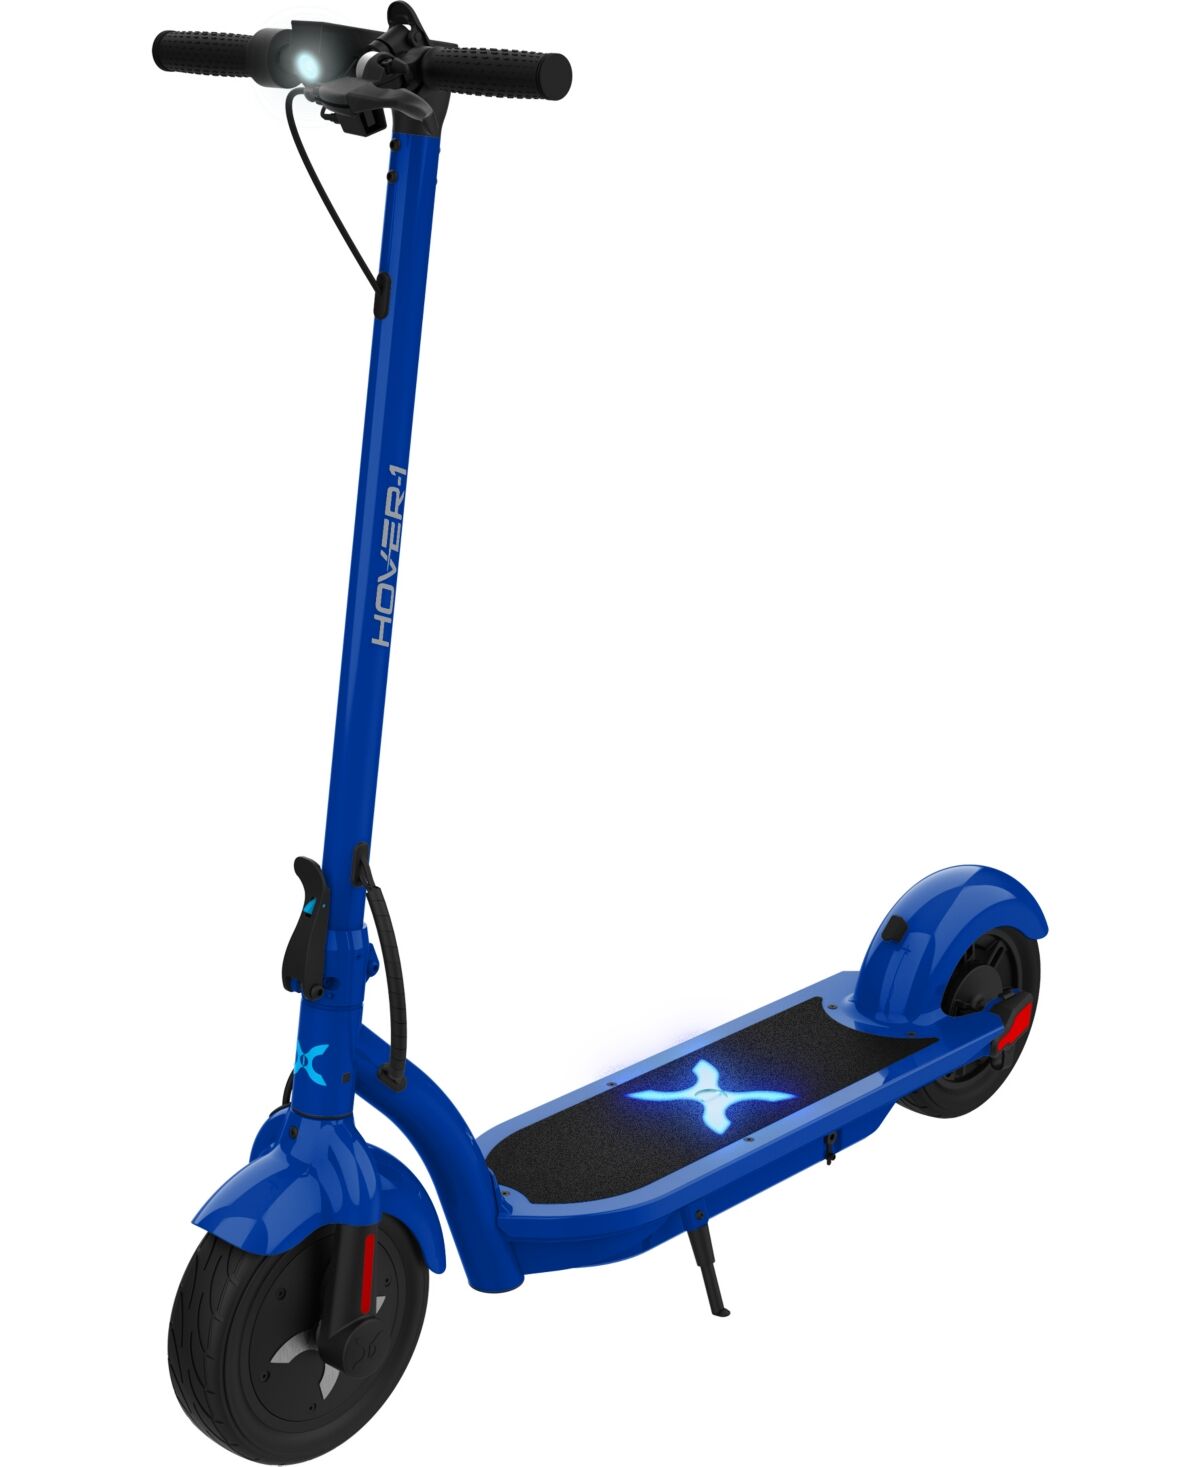 Hover-1 Alpha Electric Scooter - Blue